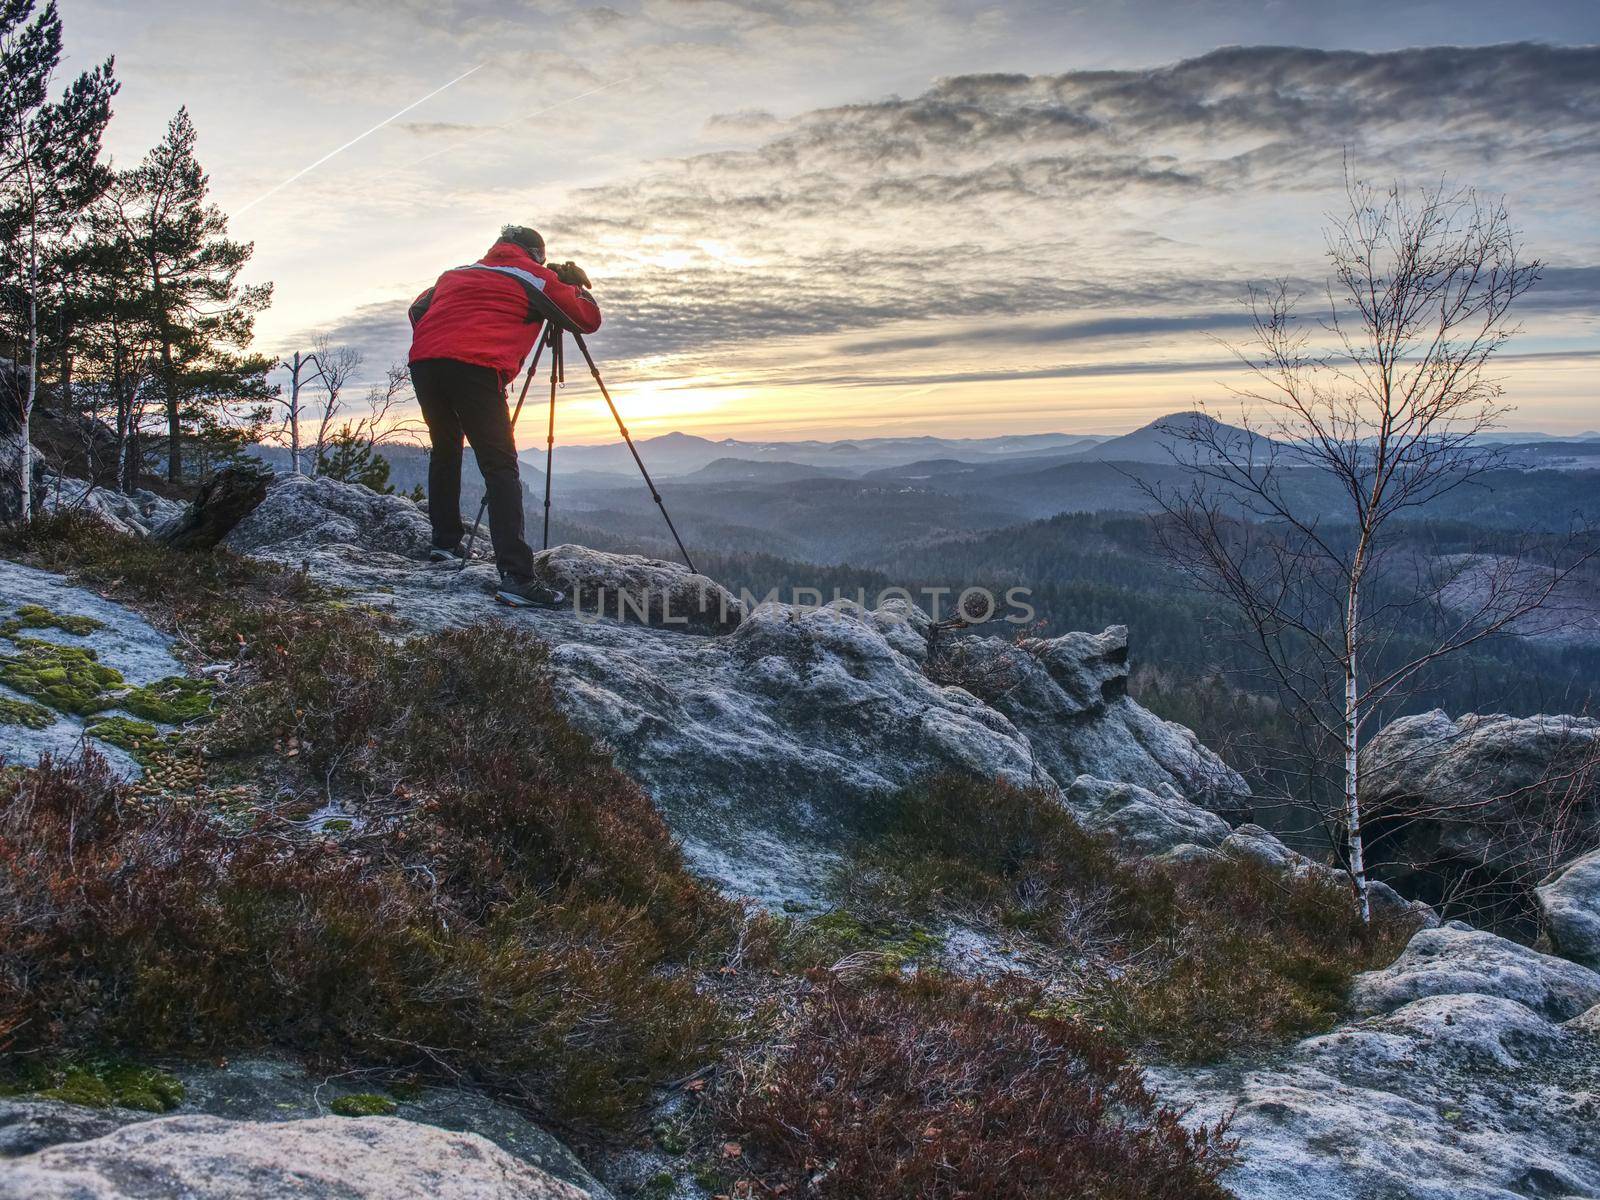 Photographer in red jacket and knitted cap stay with camera on tripod on cliff and thinking. Dreamy misty landscape, misty sunrise